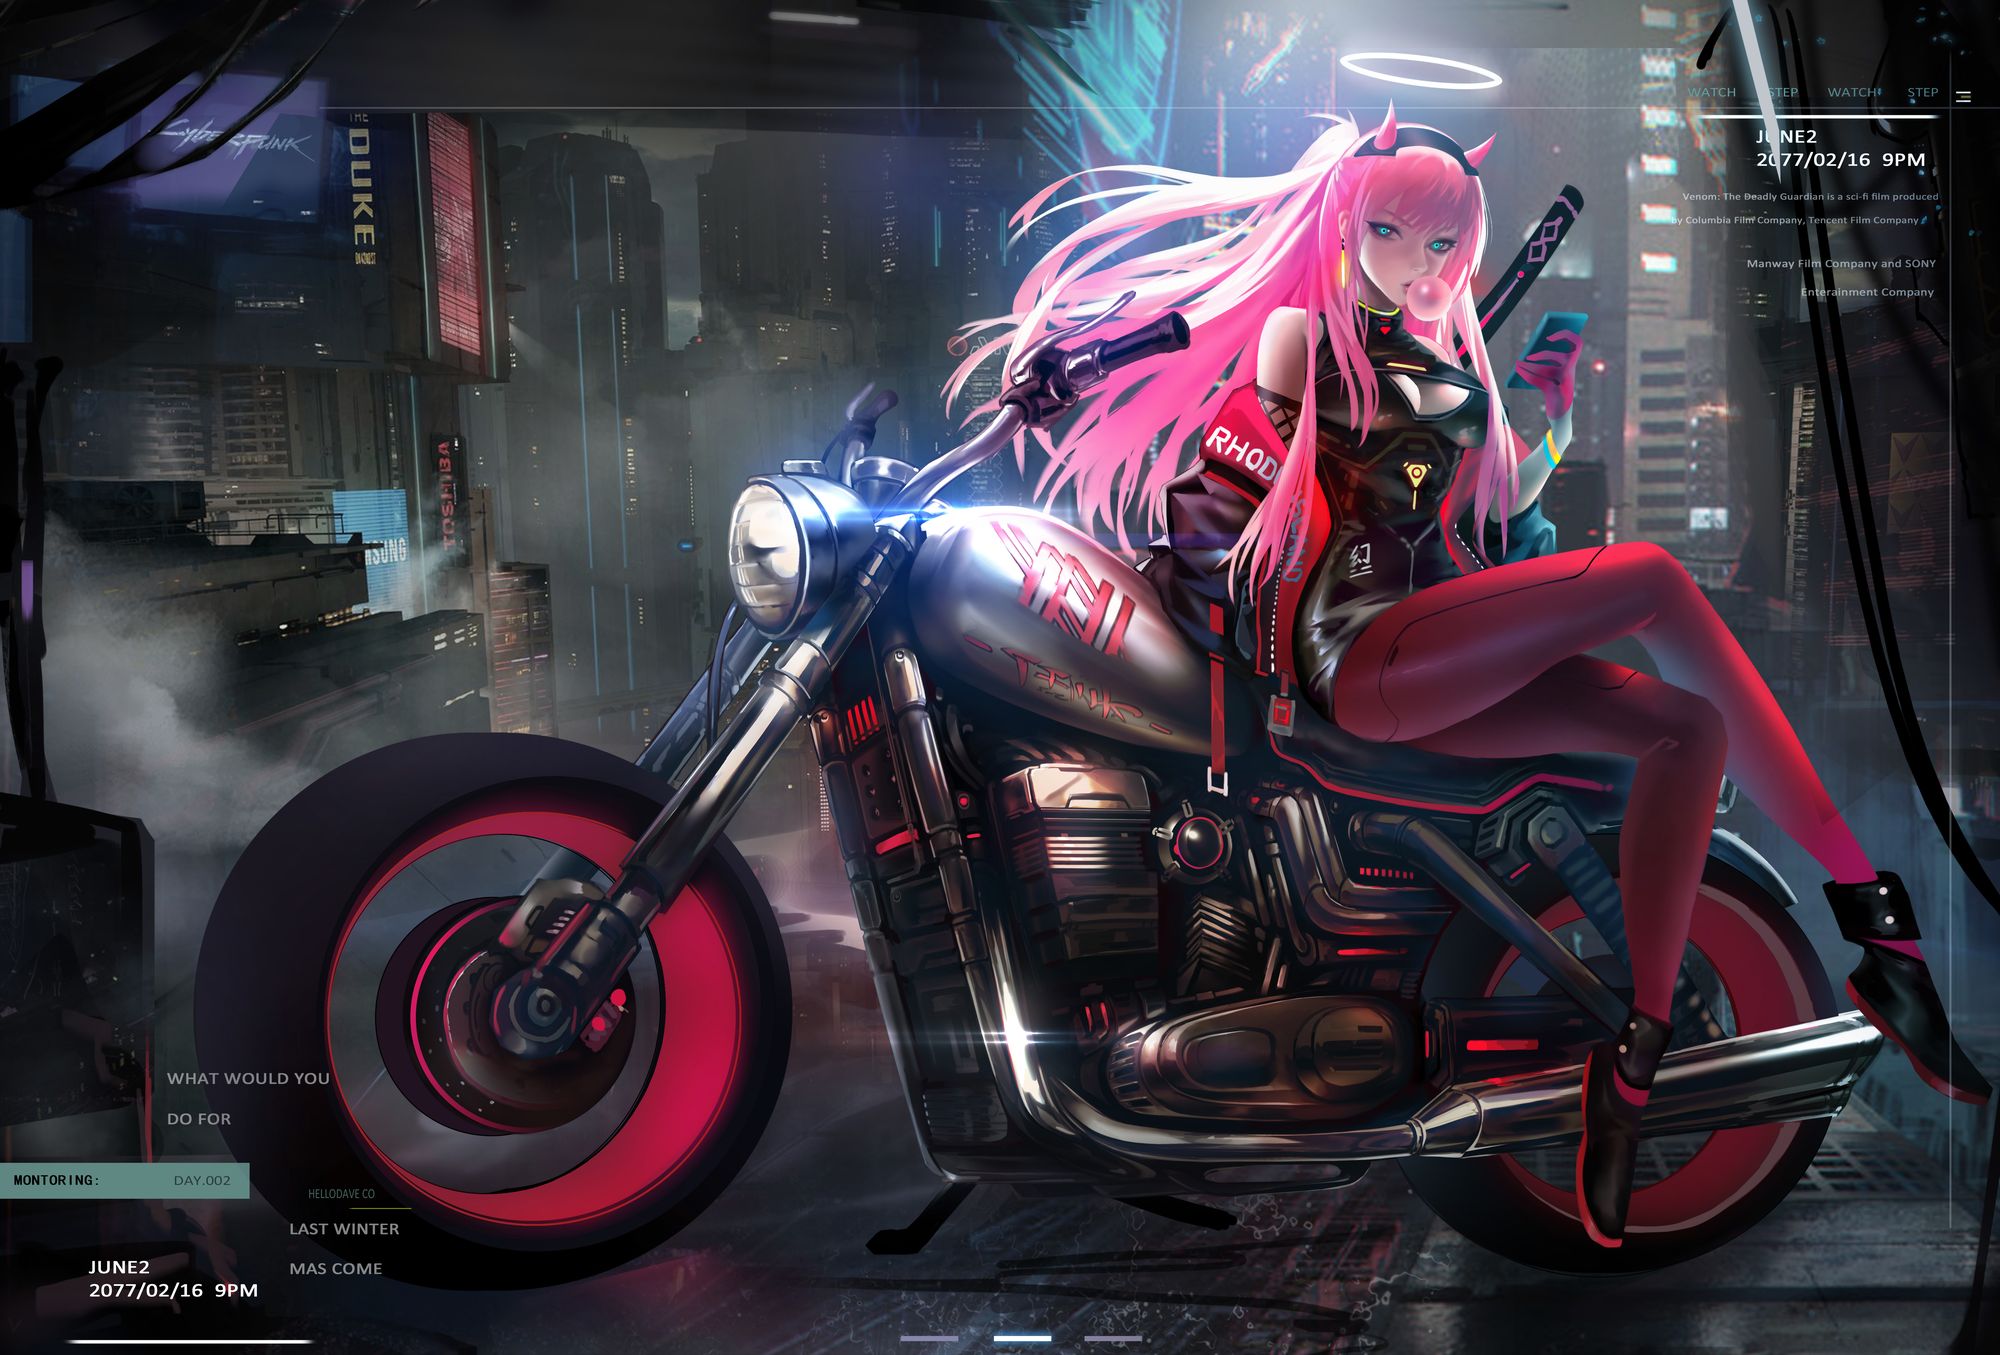 Wallpaper: Anime girl Zero Two (002) on a Motorcycle: Darling in the Franxx (Artist: gin79)